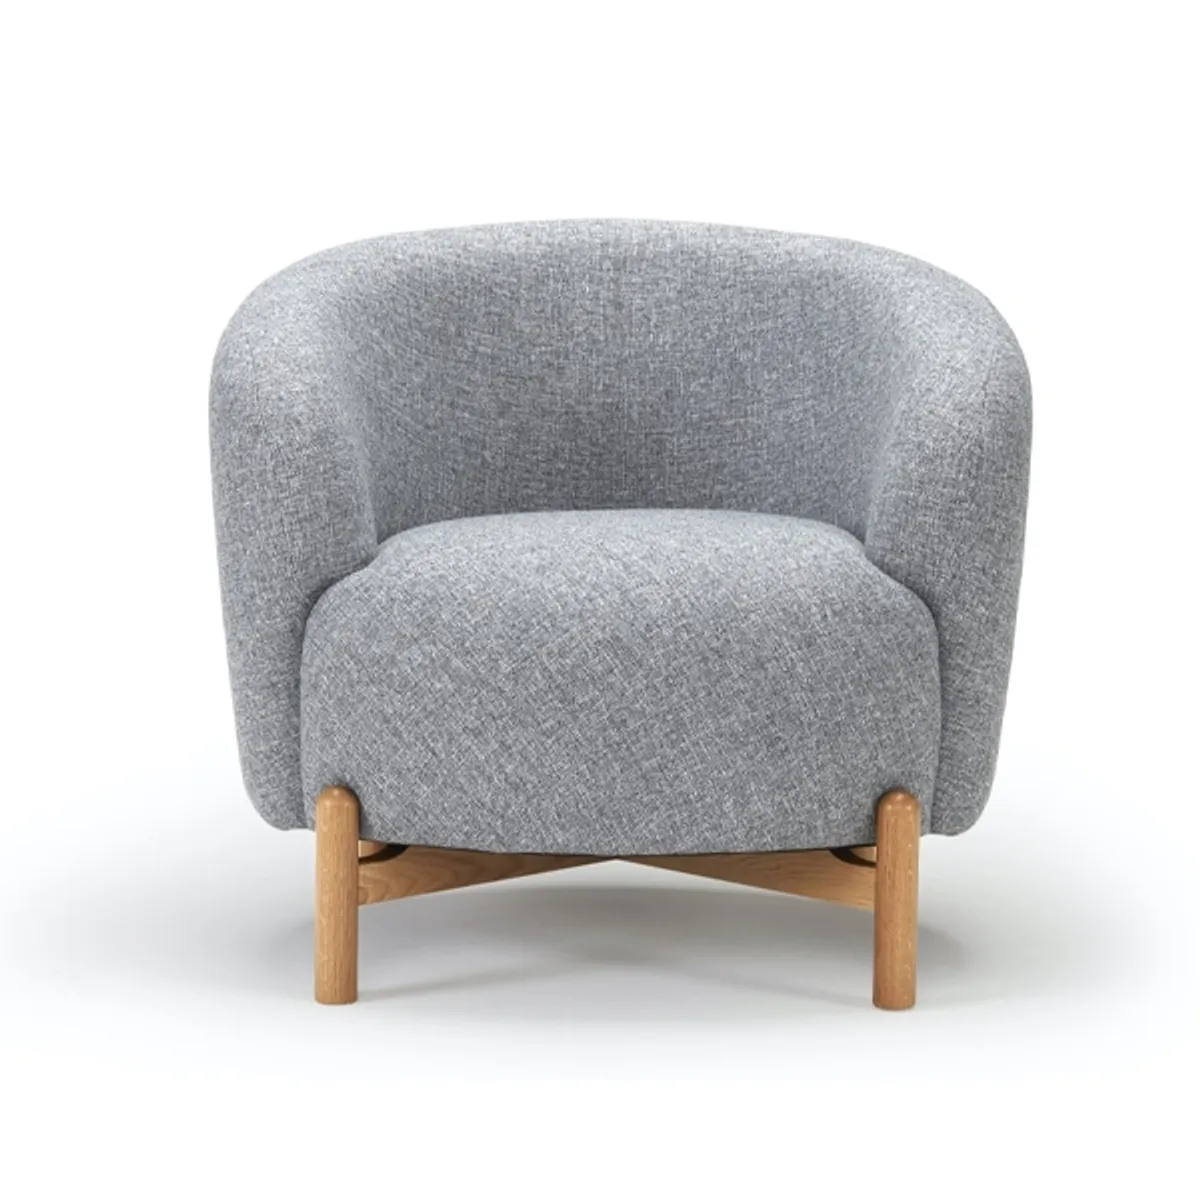 Glover wood lounge chair Inside Out Contracts4